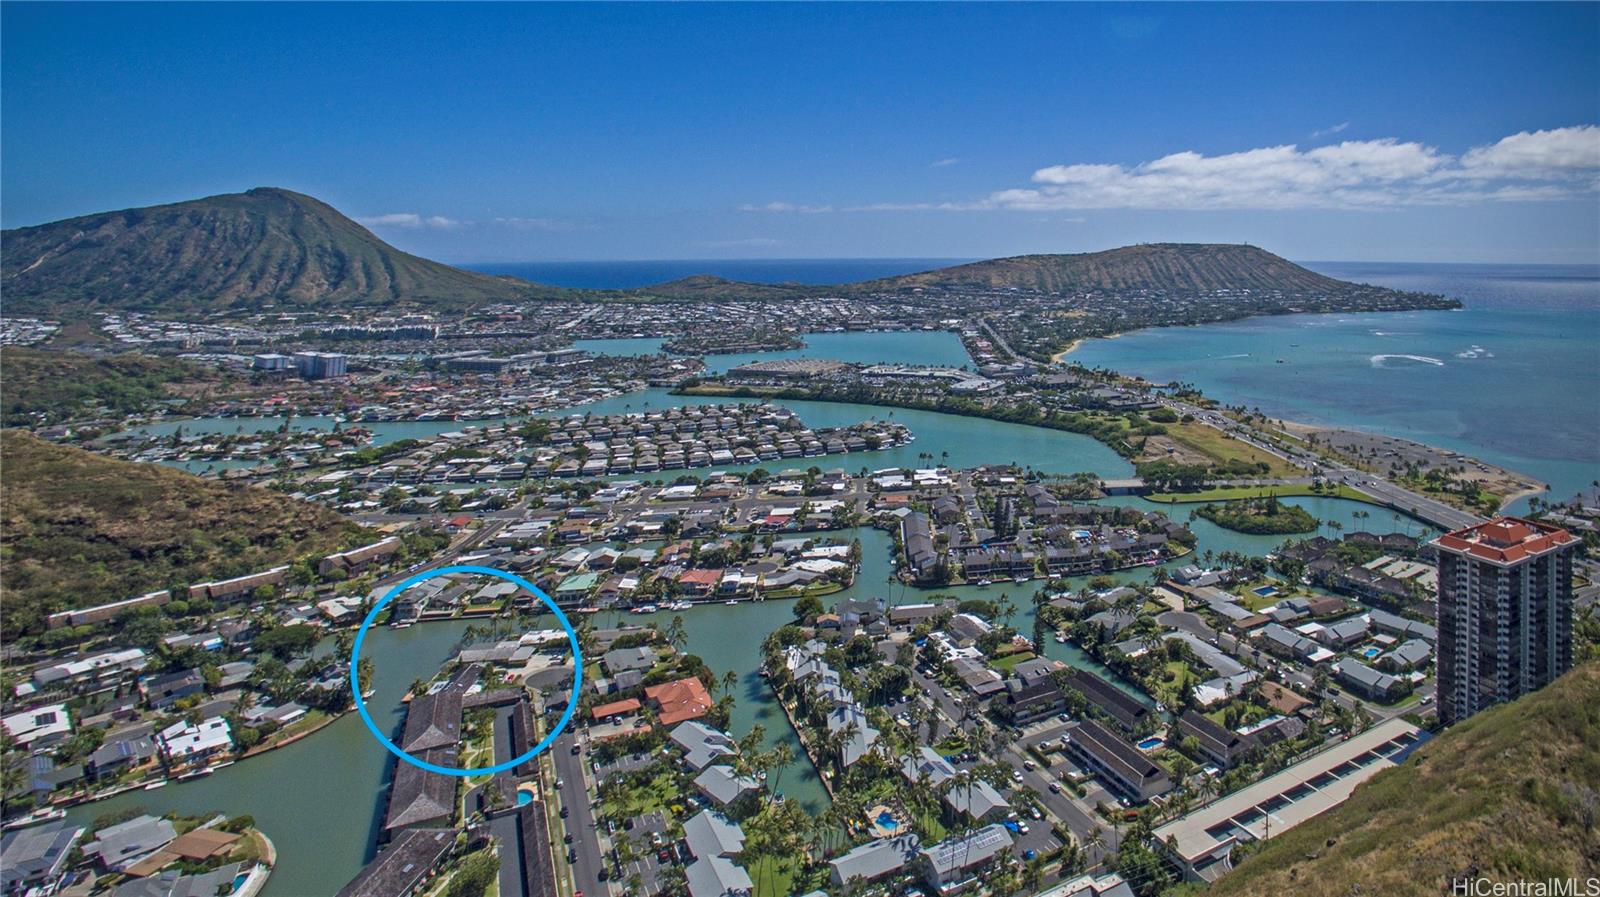 West Marina with shopping, restaurants and schools that make up the Hawaii Kai community and marina.